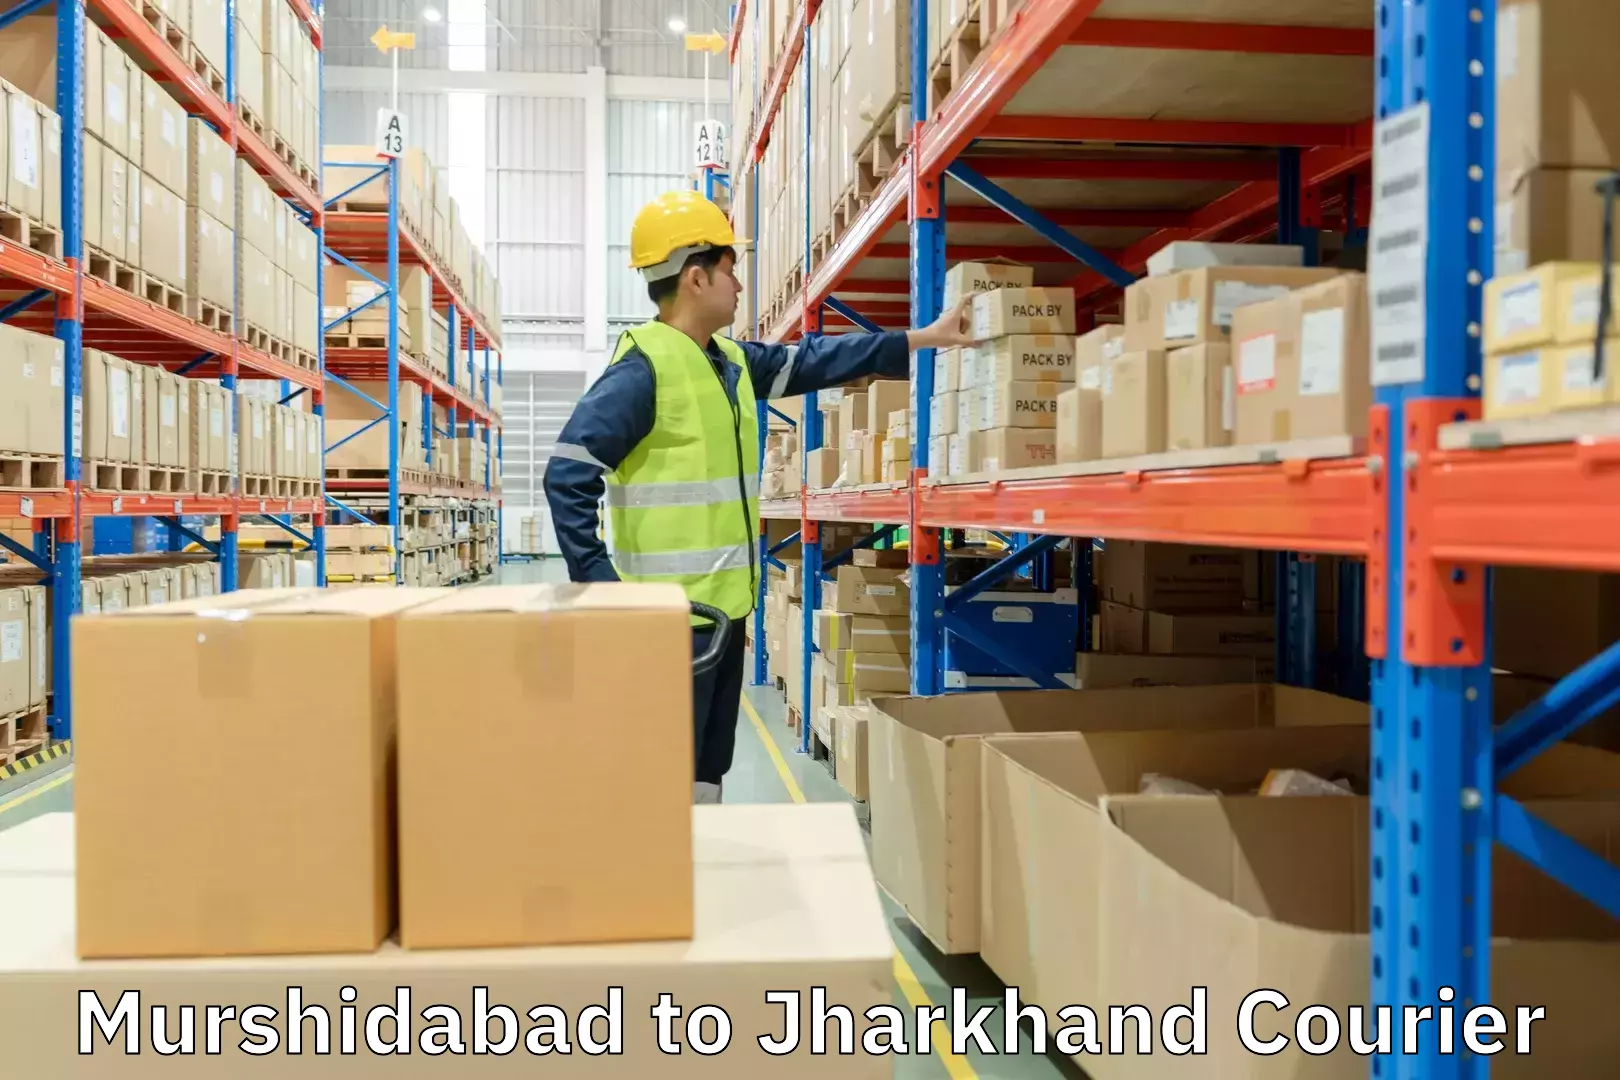 Cash on delivery service Murshidabad to Jharkhand